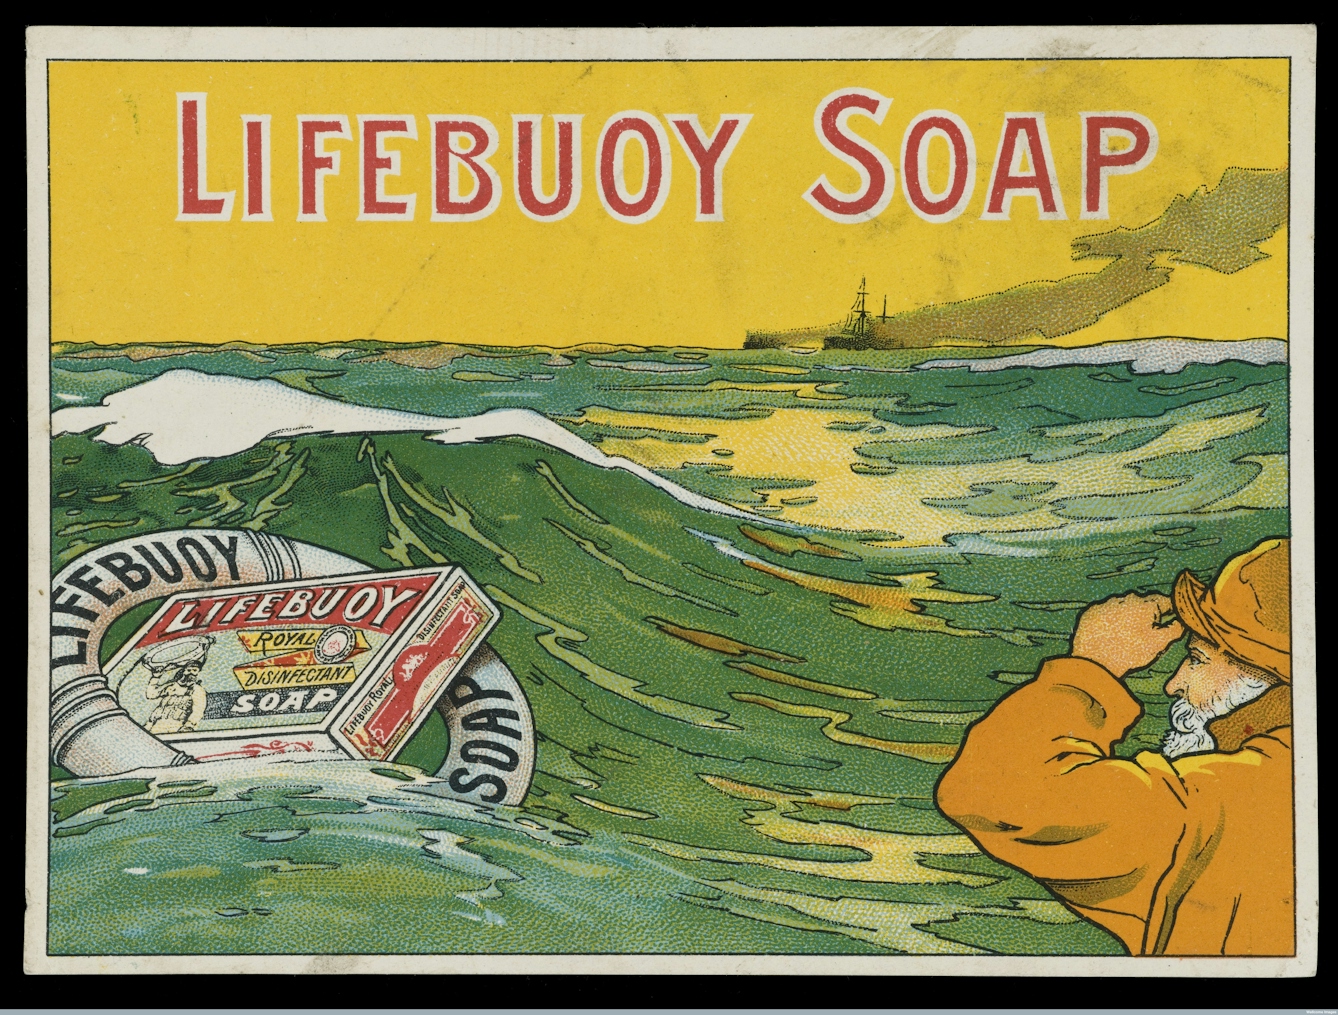 A fisherman looks out to sea towards a life-preserving ring containing a bar of Lifebuoy brand soap.